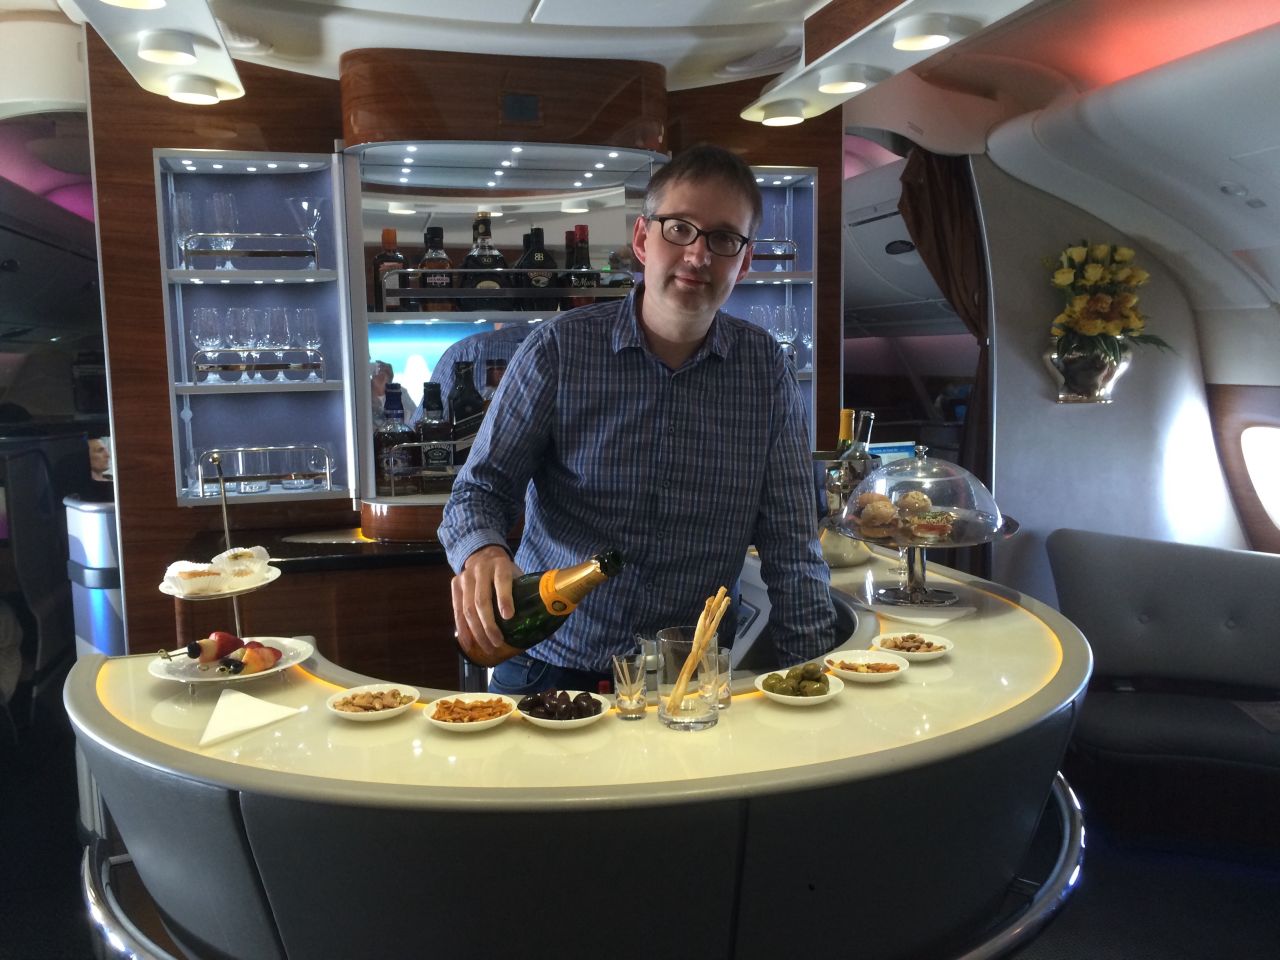 Rob Burgess edits <a href="http://www.headforpoints.com/" target="_blank" target="_blank">Head for Points</a>, which helps fliers "maximize their miles." Here he takes a break at the business class bar on an Emirates A380 flight.